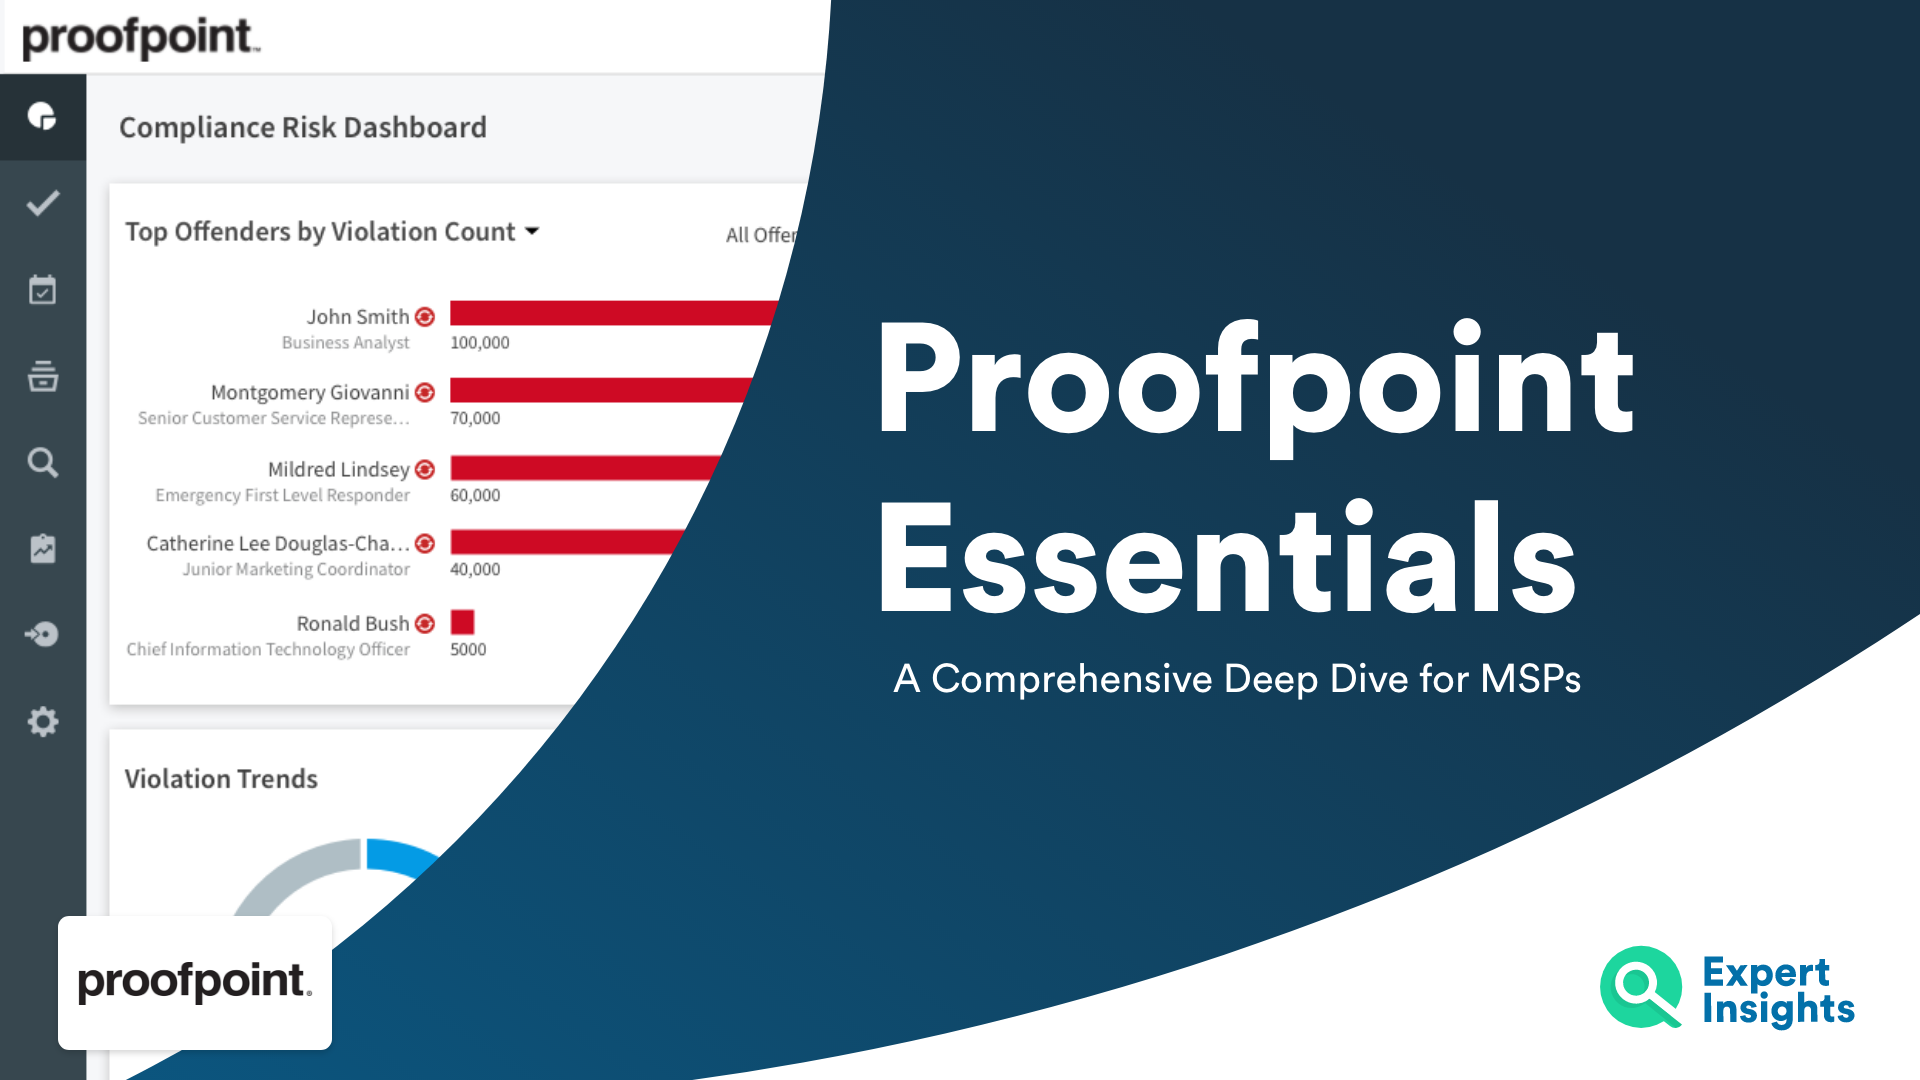 Proofpoint Essentials for MSPs